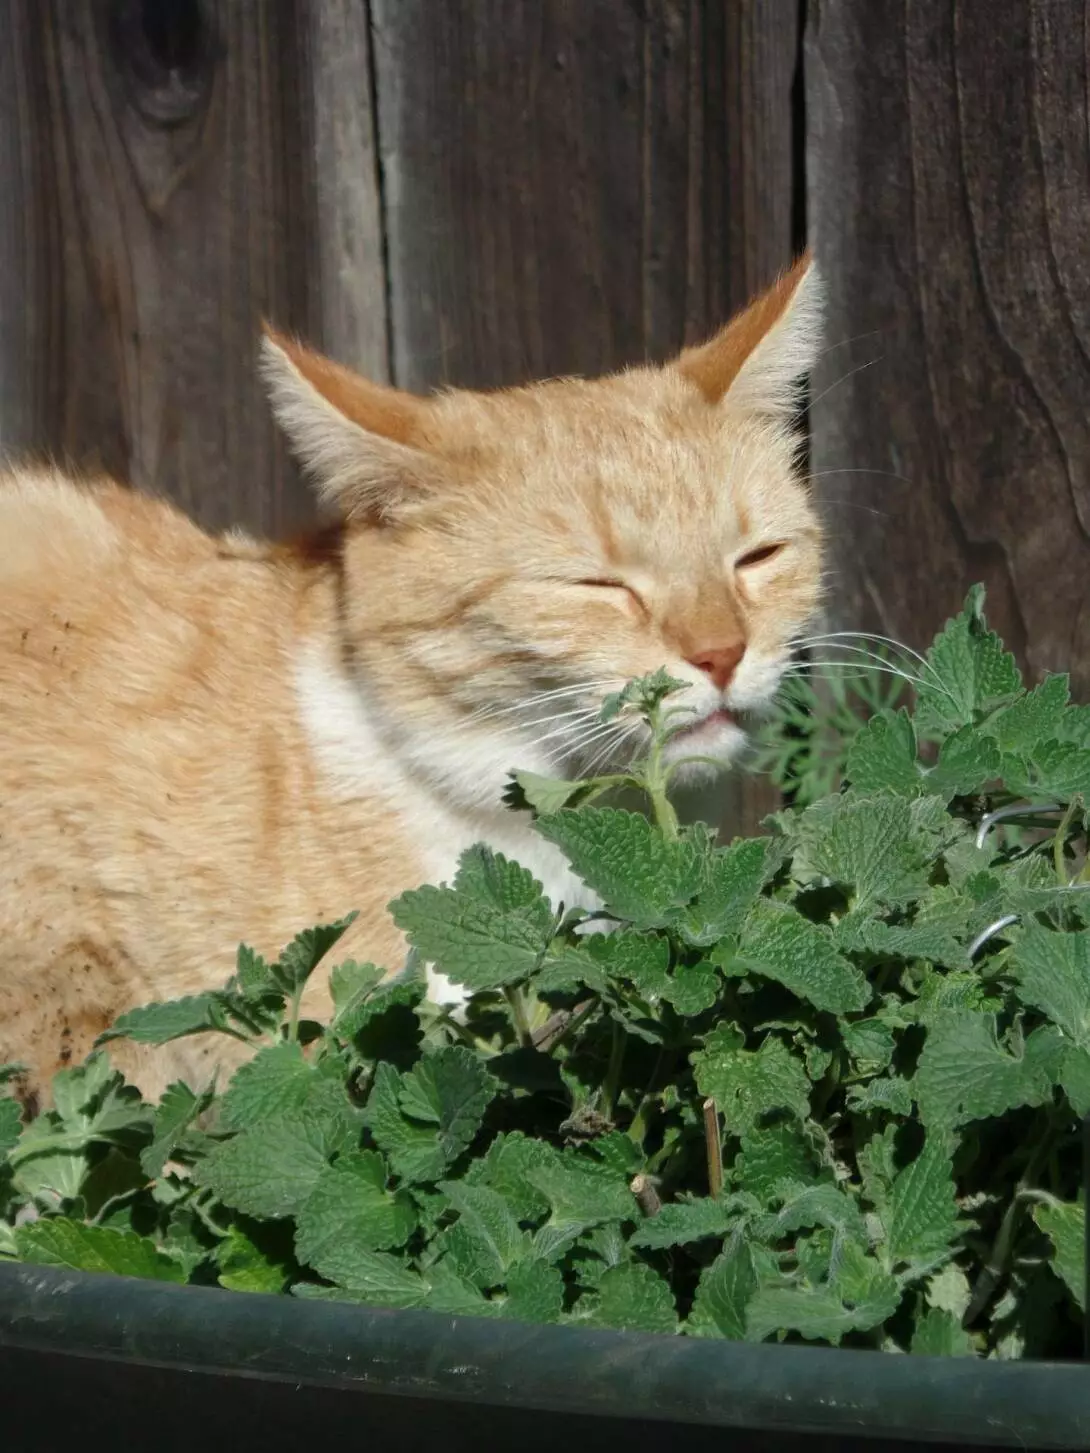 The Mystery of Cats with the Uses of Catnip